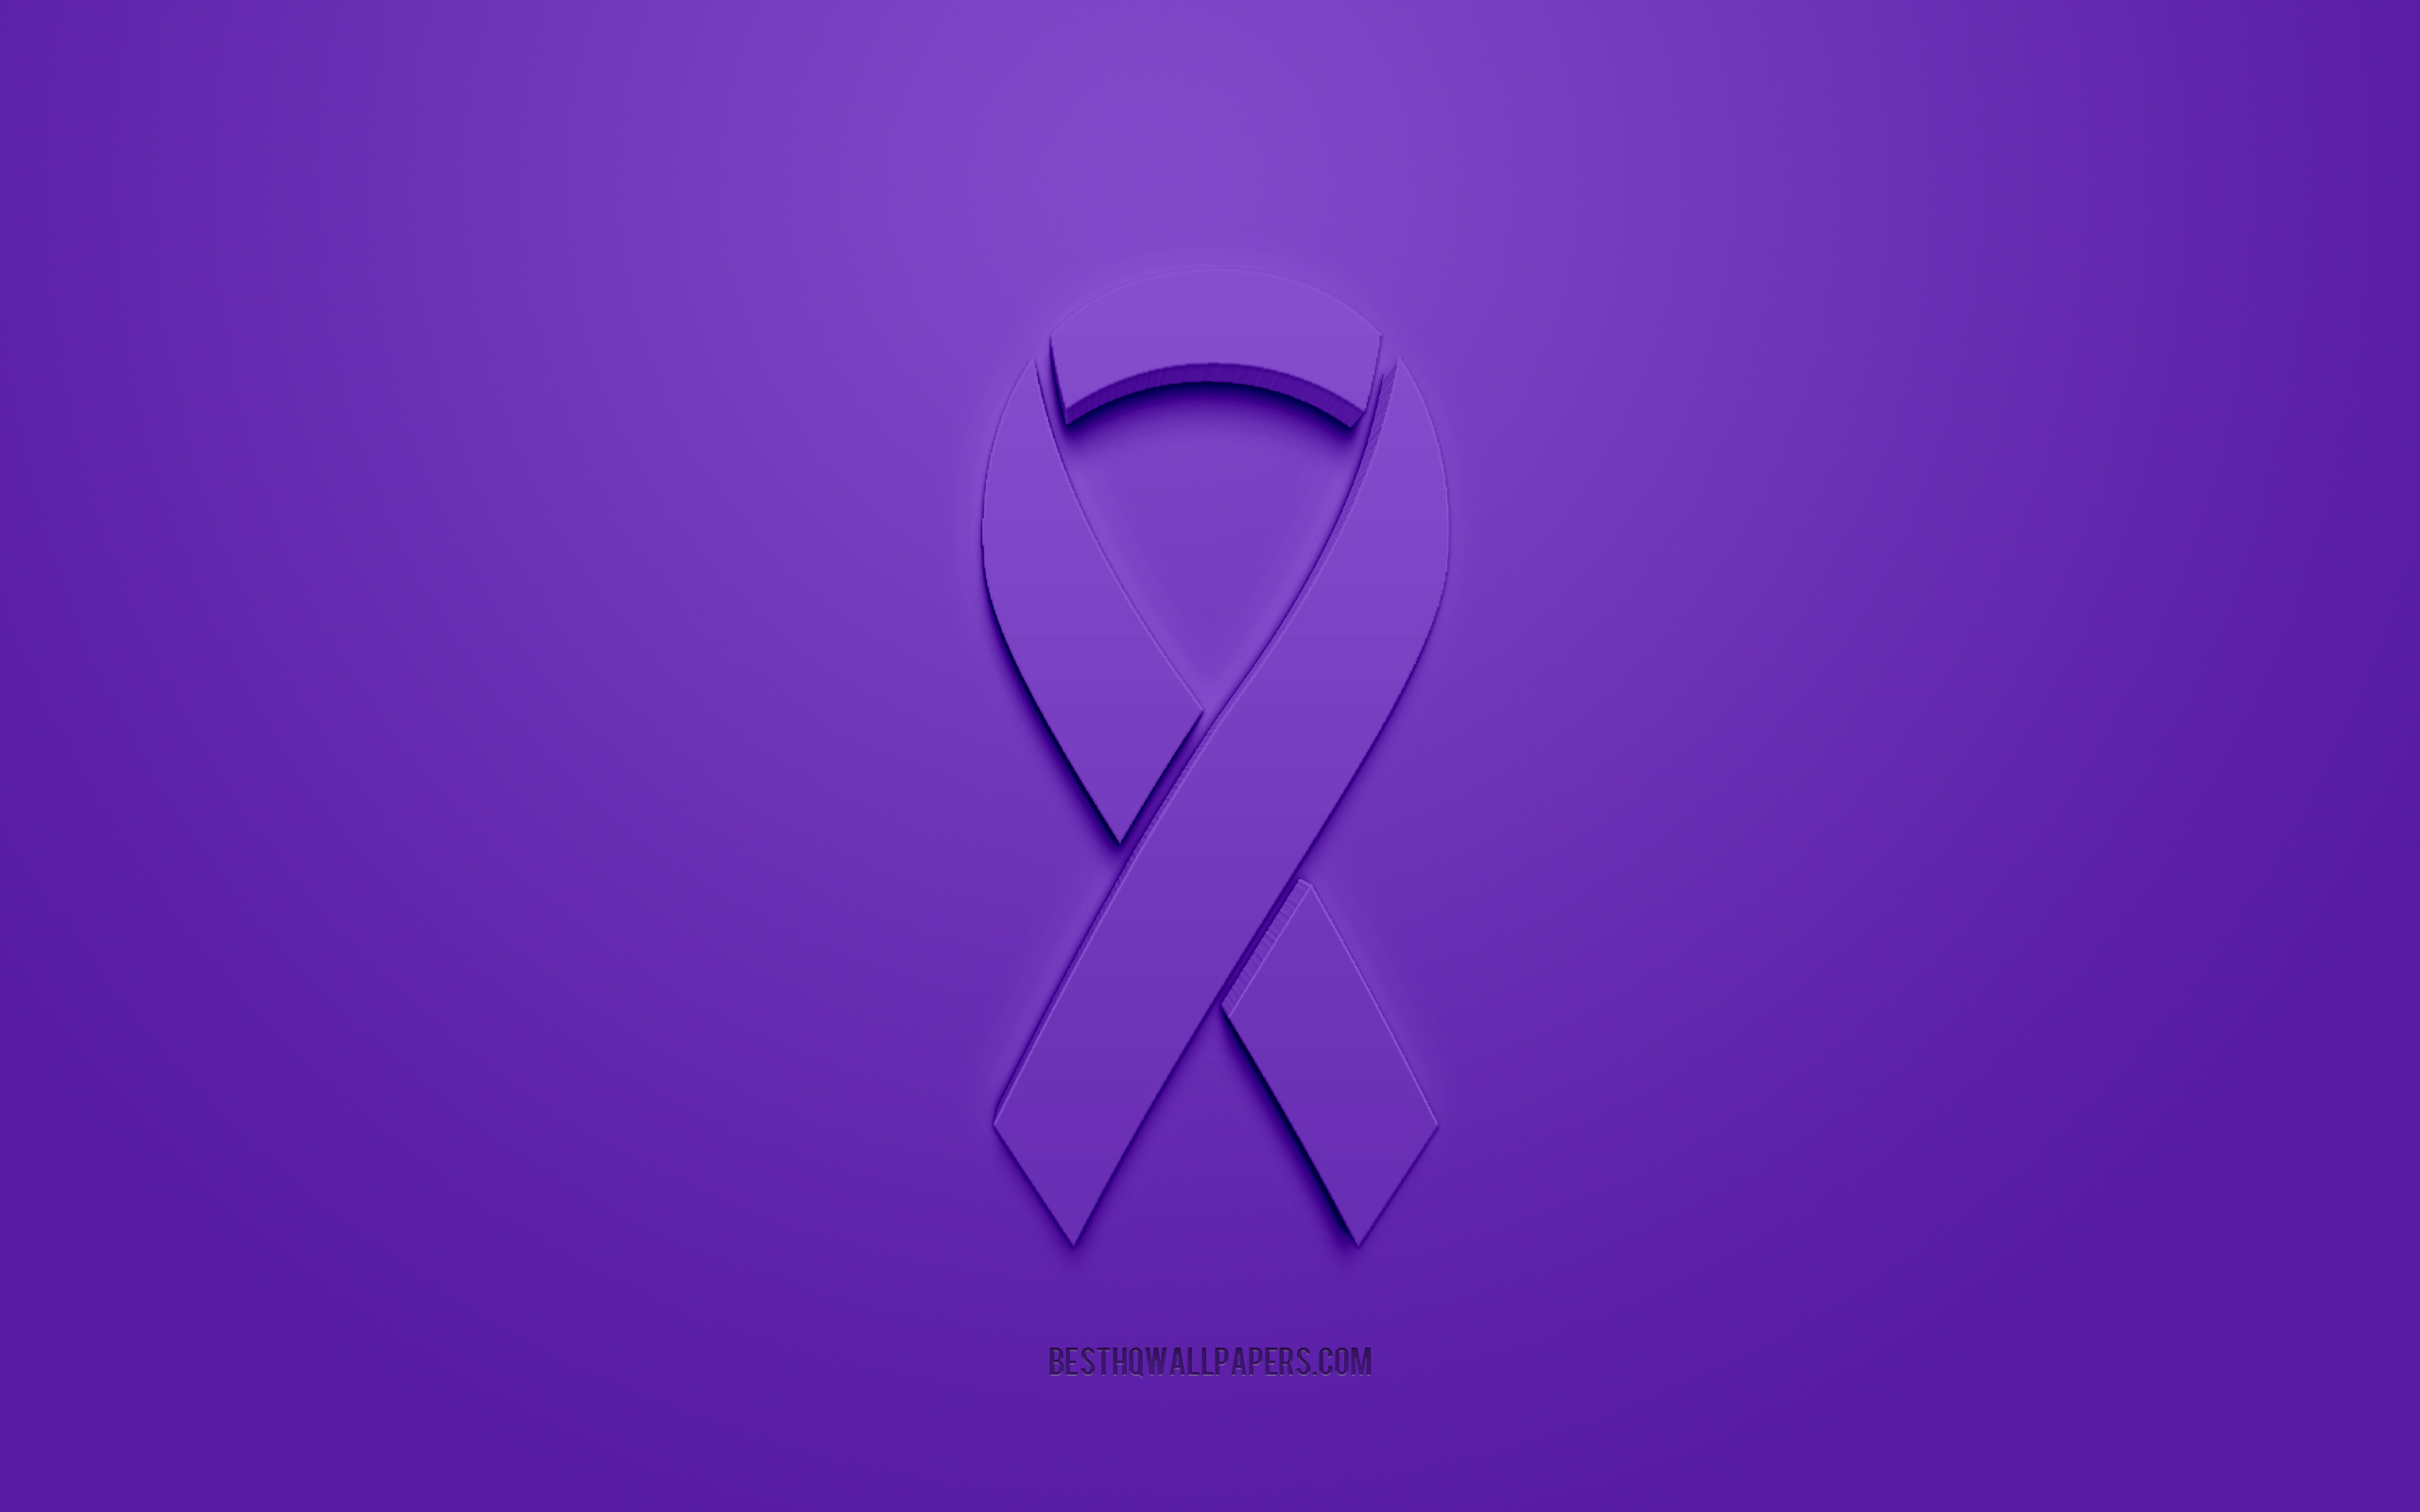 Download wallpaper Colon Cancer ribbon, creative 3D logo, purple 3D ribbon, Colon Cancer Awareness ribbon, Colon Cancer, purple background, Cancer ribbons, Awareness ribbons for desktop with resolution 2560x1600. High Quality HD picture